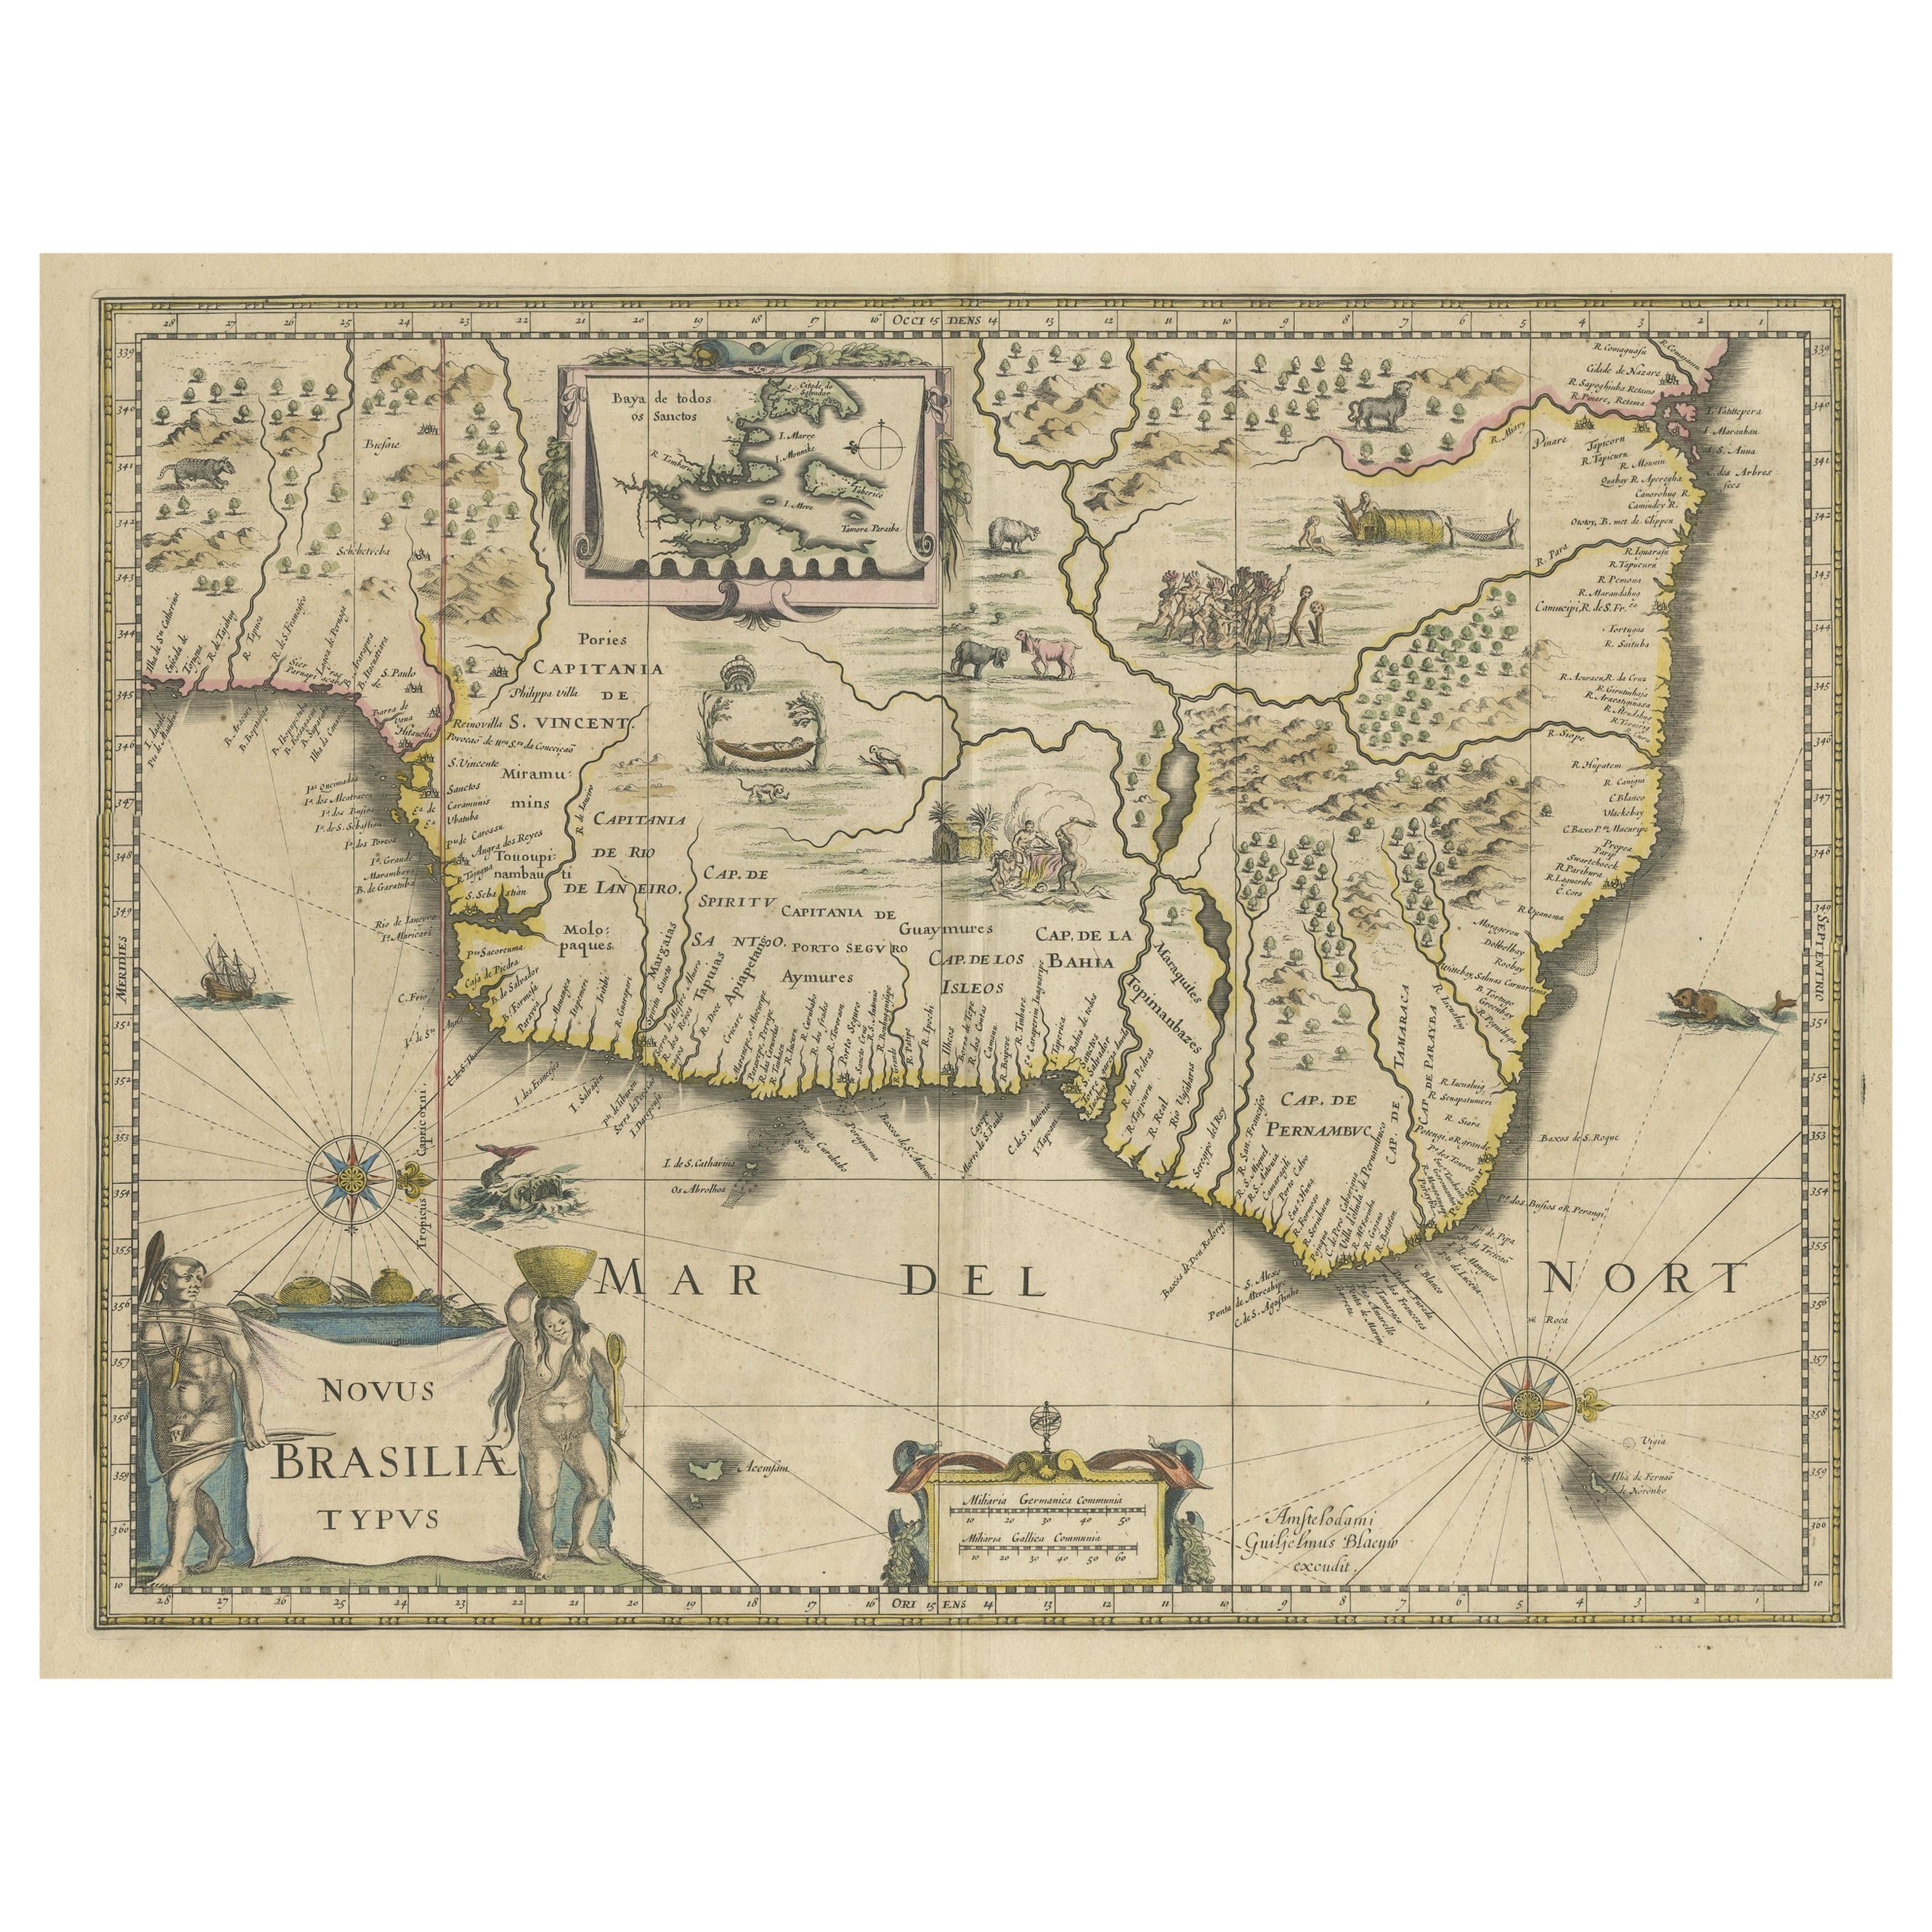 Old Color Engraving of Blaeu's first Map of Brazil, North Oriented to the Right For Sale